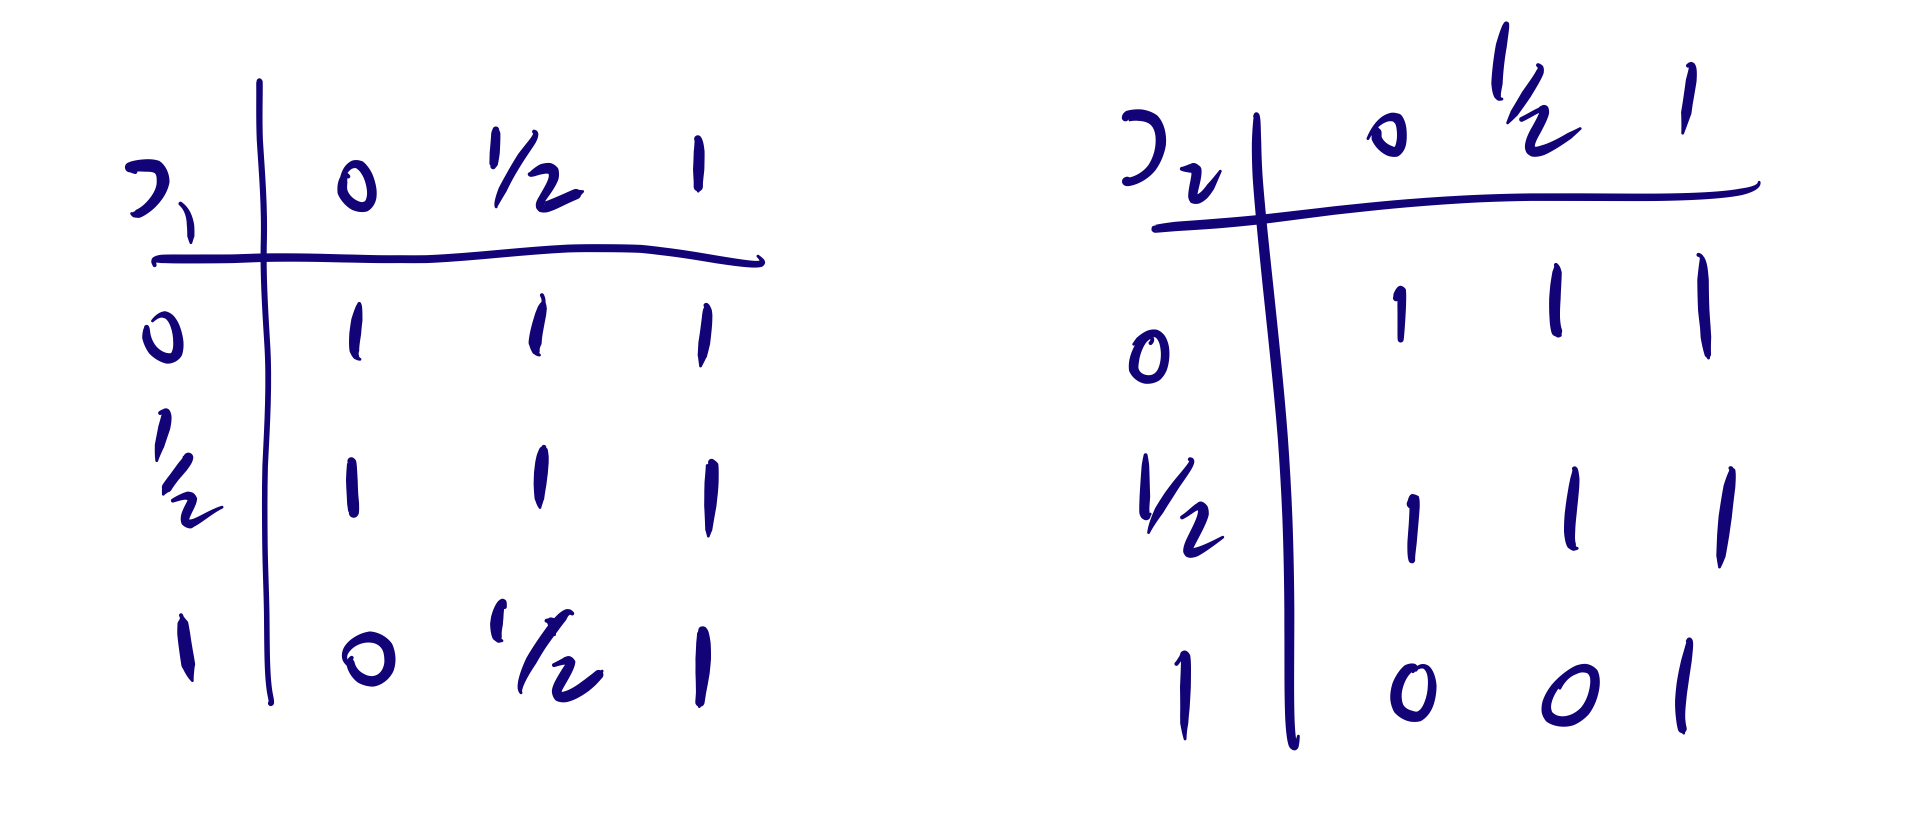 Two truth tables for conditionals